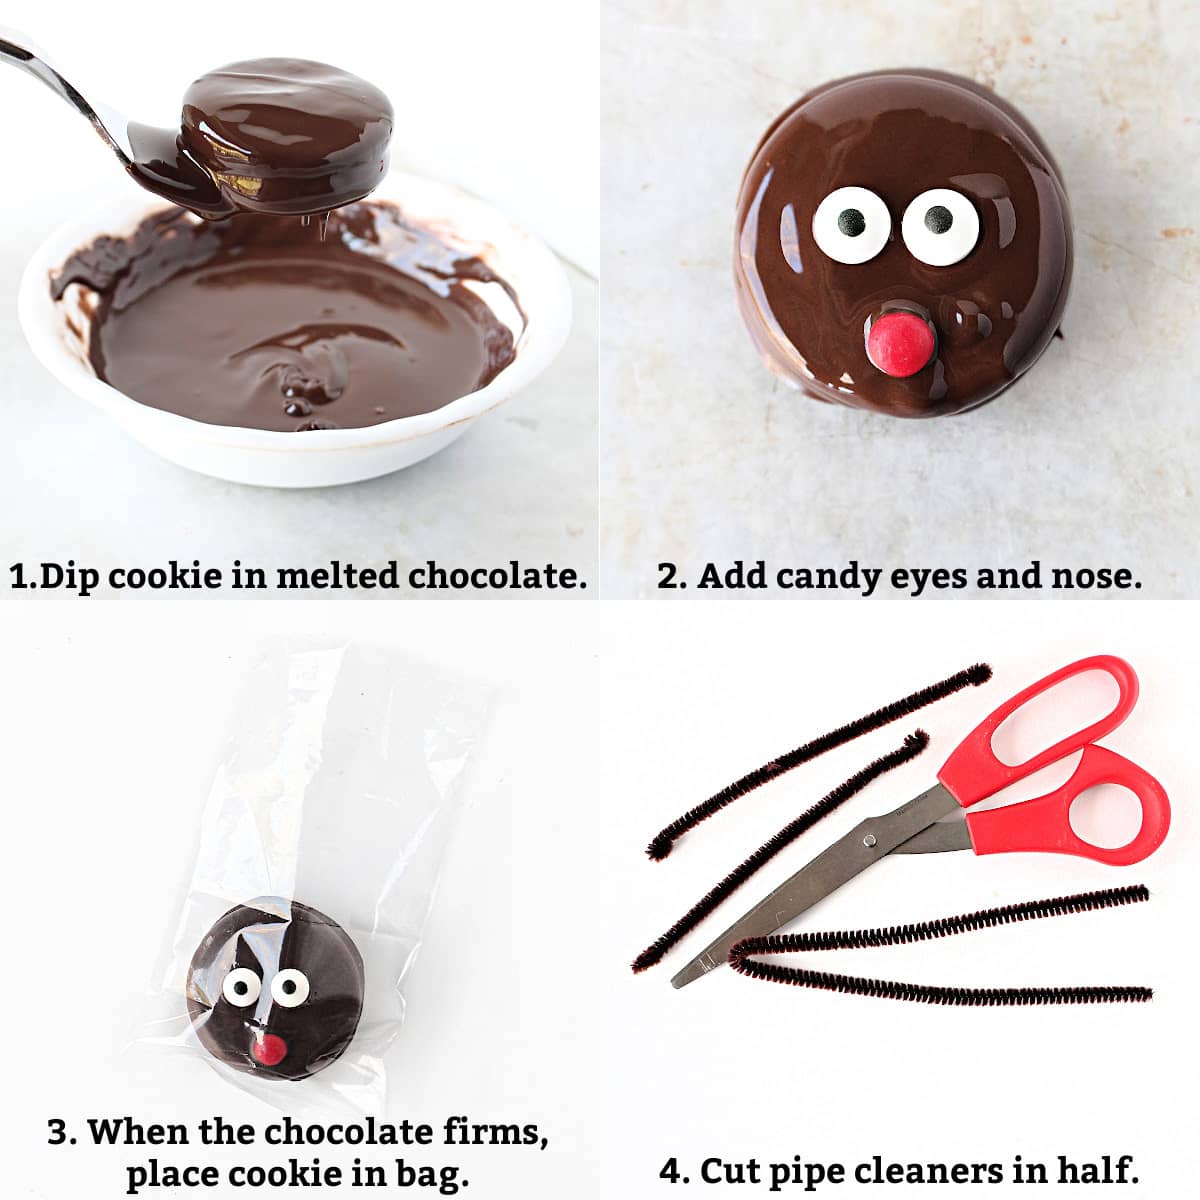 Instructions: dip cookie in chocolate, add  eyes and nose, put cookie in bag, cut pipe cleaners.